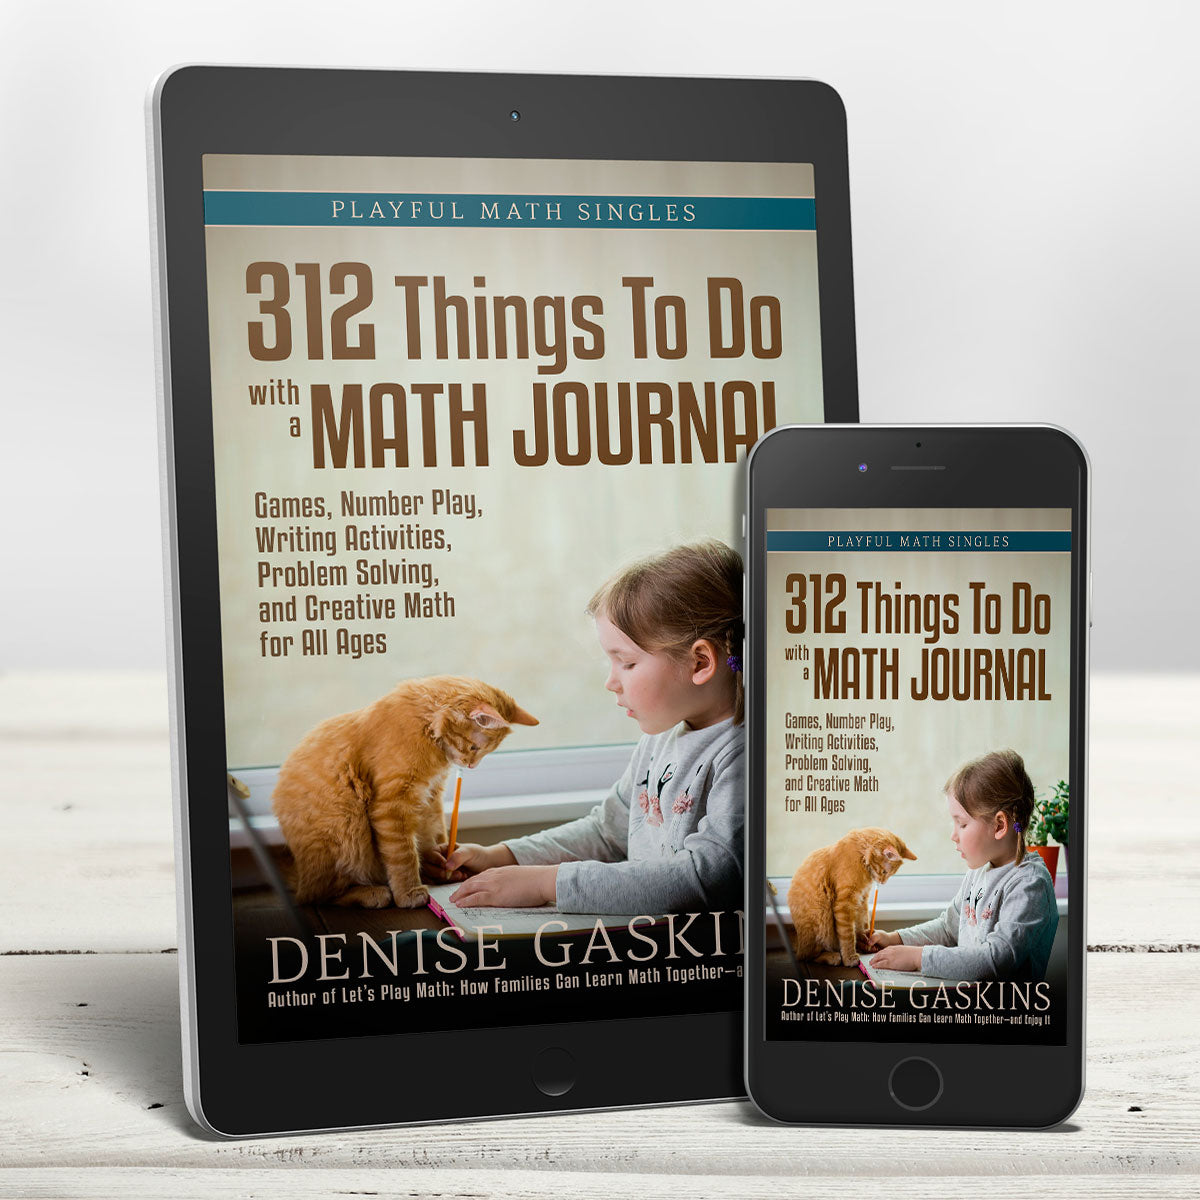 Math journaling games and activities ebook by Denise Gaskins